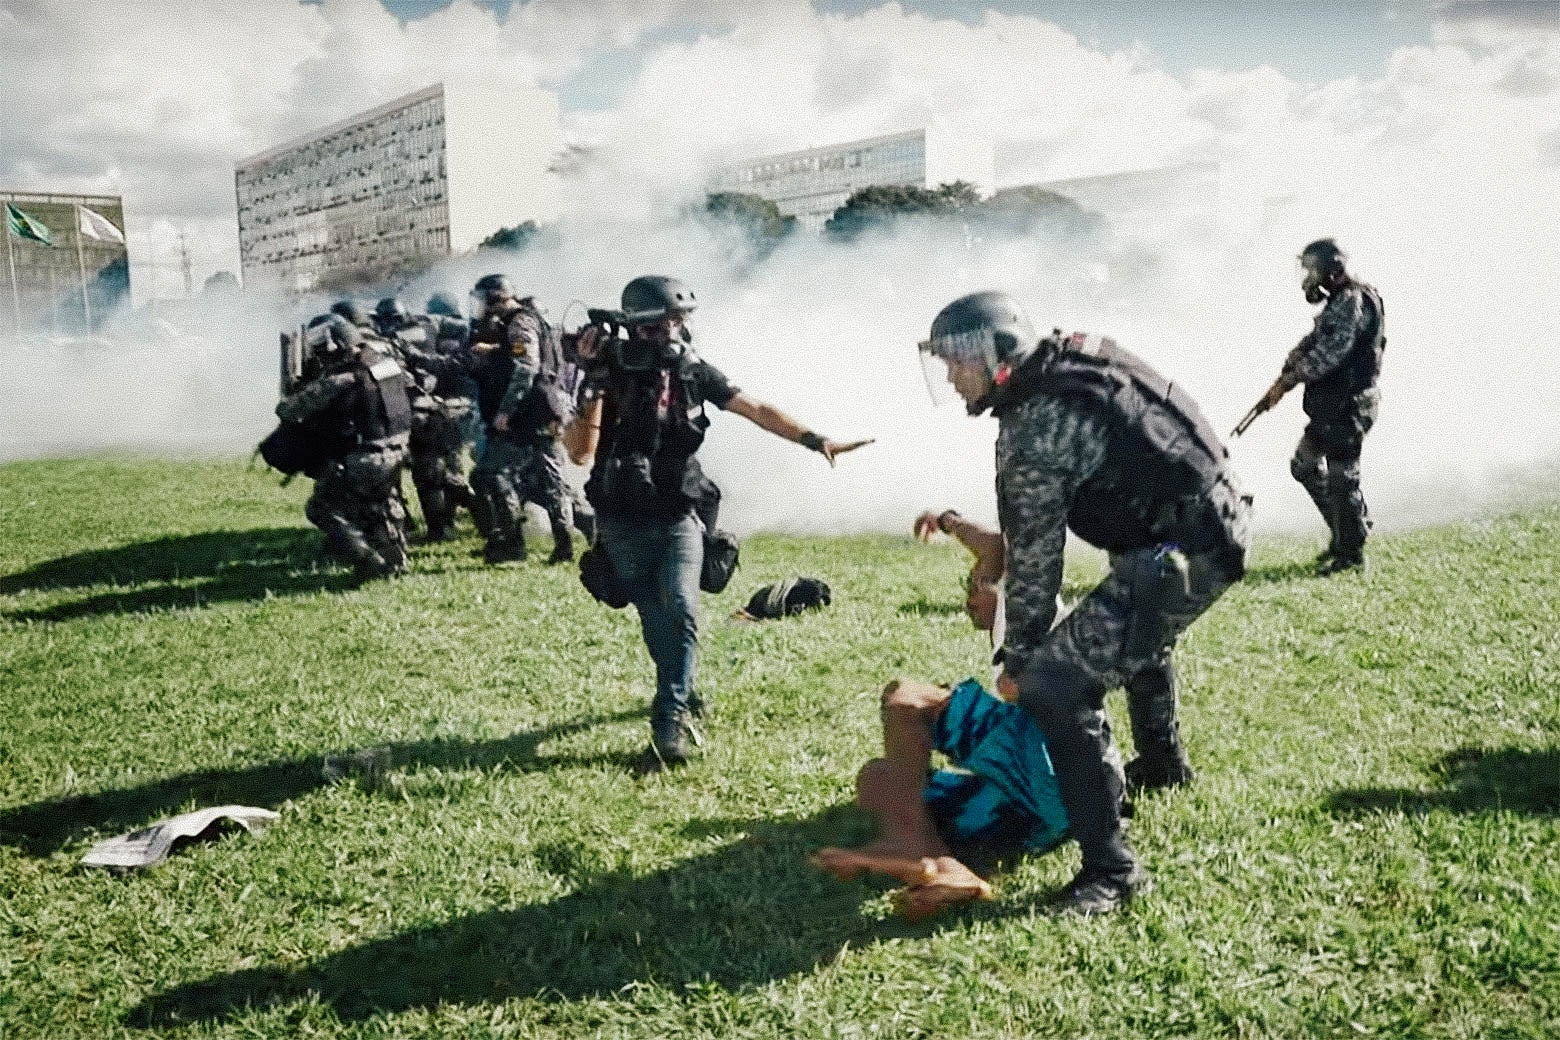 In this still from The Edge of Democracy, armed law enforcement or military deploy crowd control gas on a protest. In the foreground, one officer is gripping a fallen citizen.